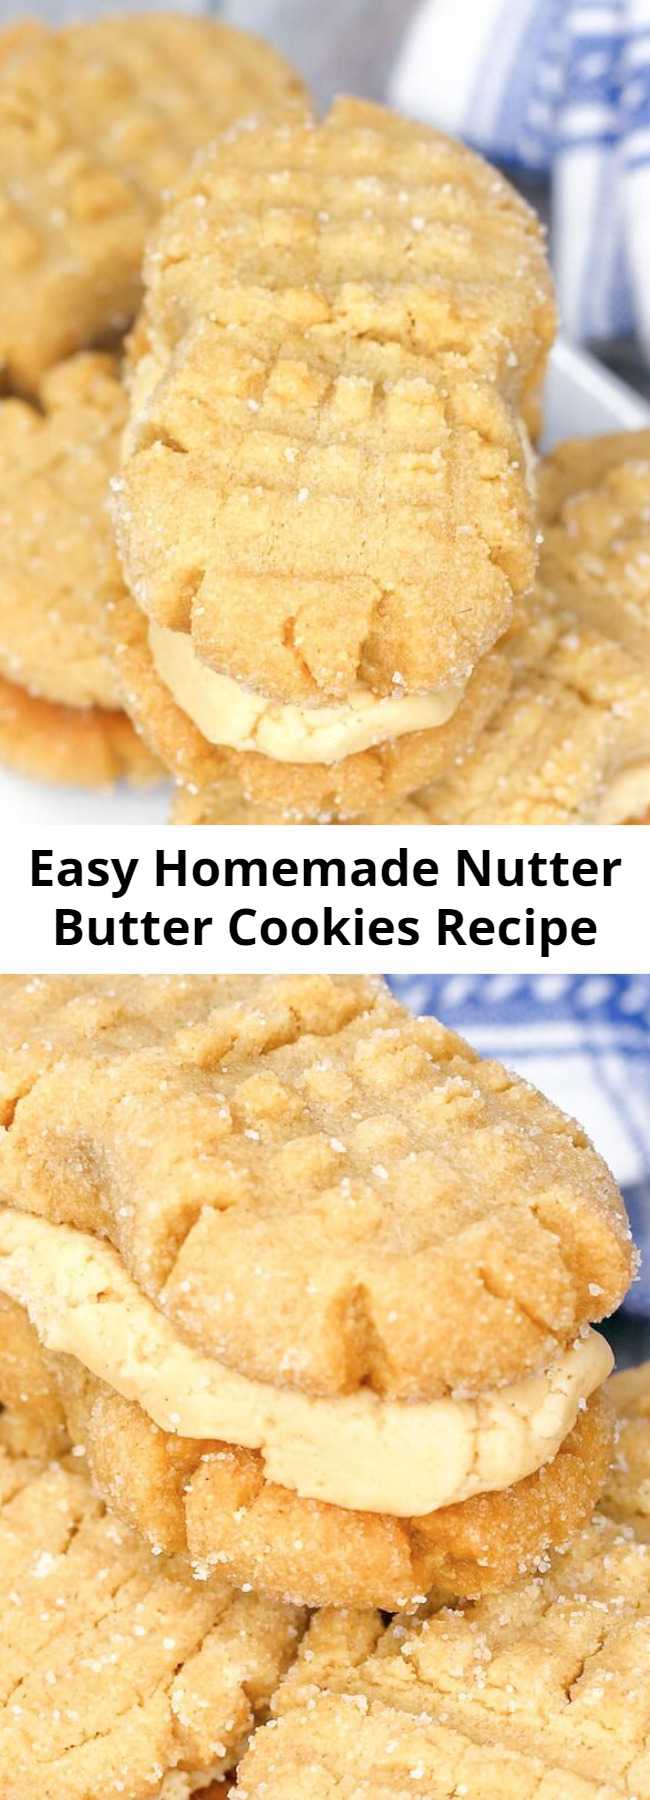 Easy Homemade Nutter Butter Cookies Recipe - Soft peanut butter cookies filled with luscious peanut butter cream — these Homemade Nutter Butter cookies might just be better than the real thing! #cookies #peanutbutter #desserts